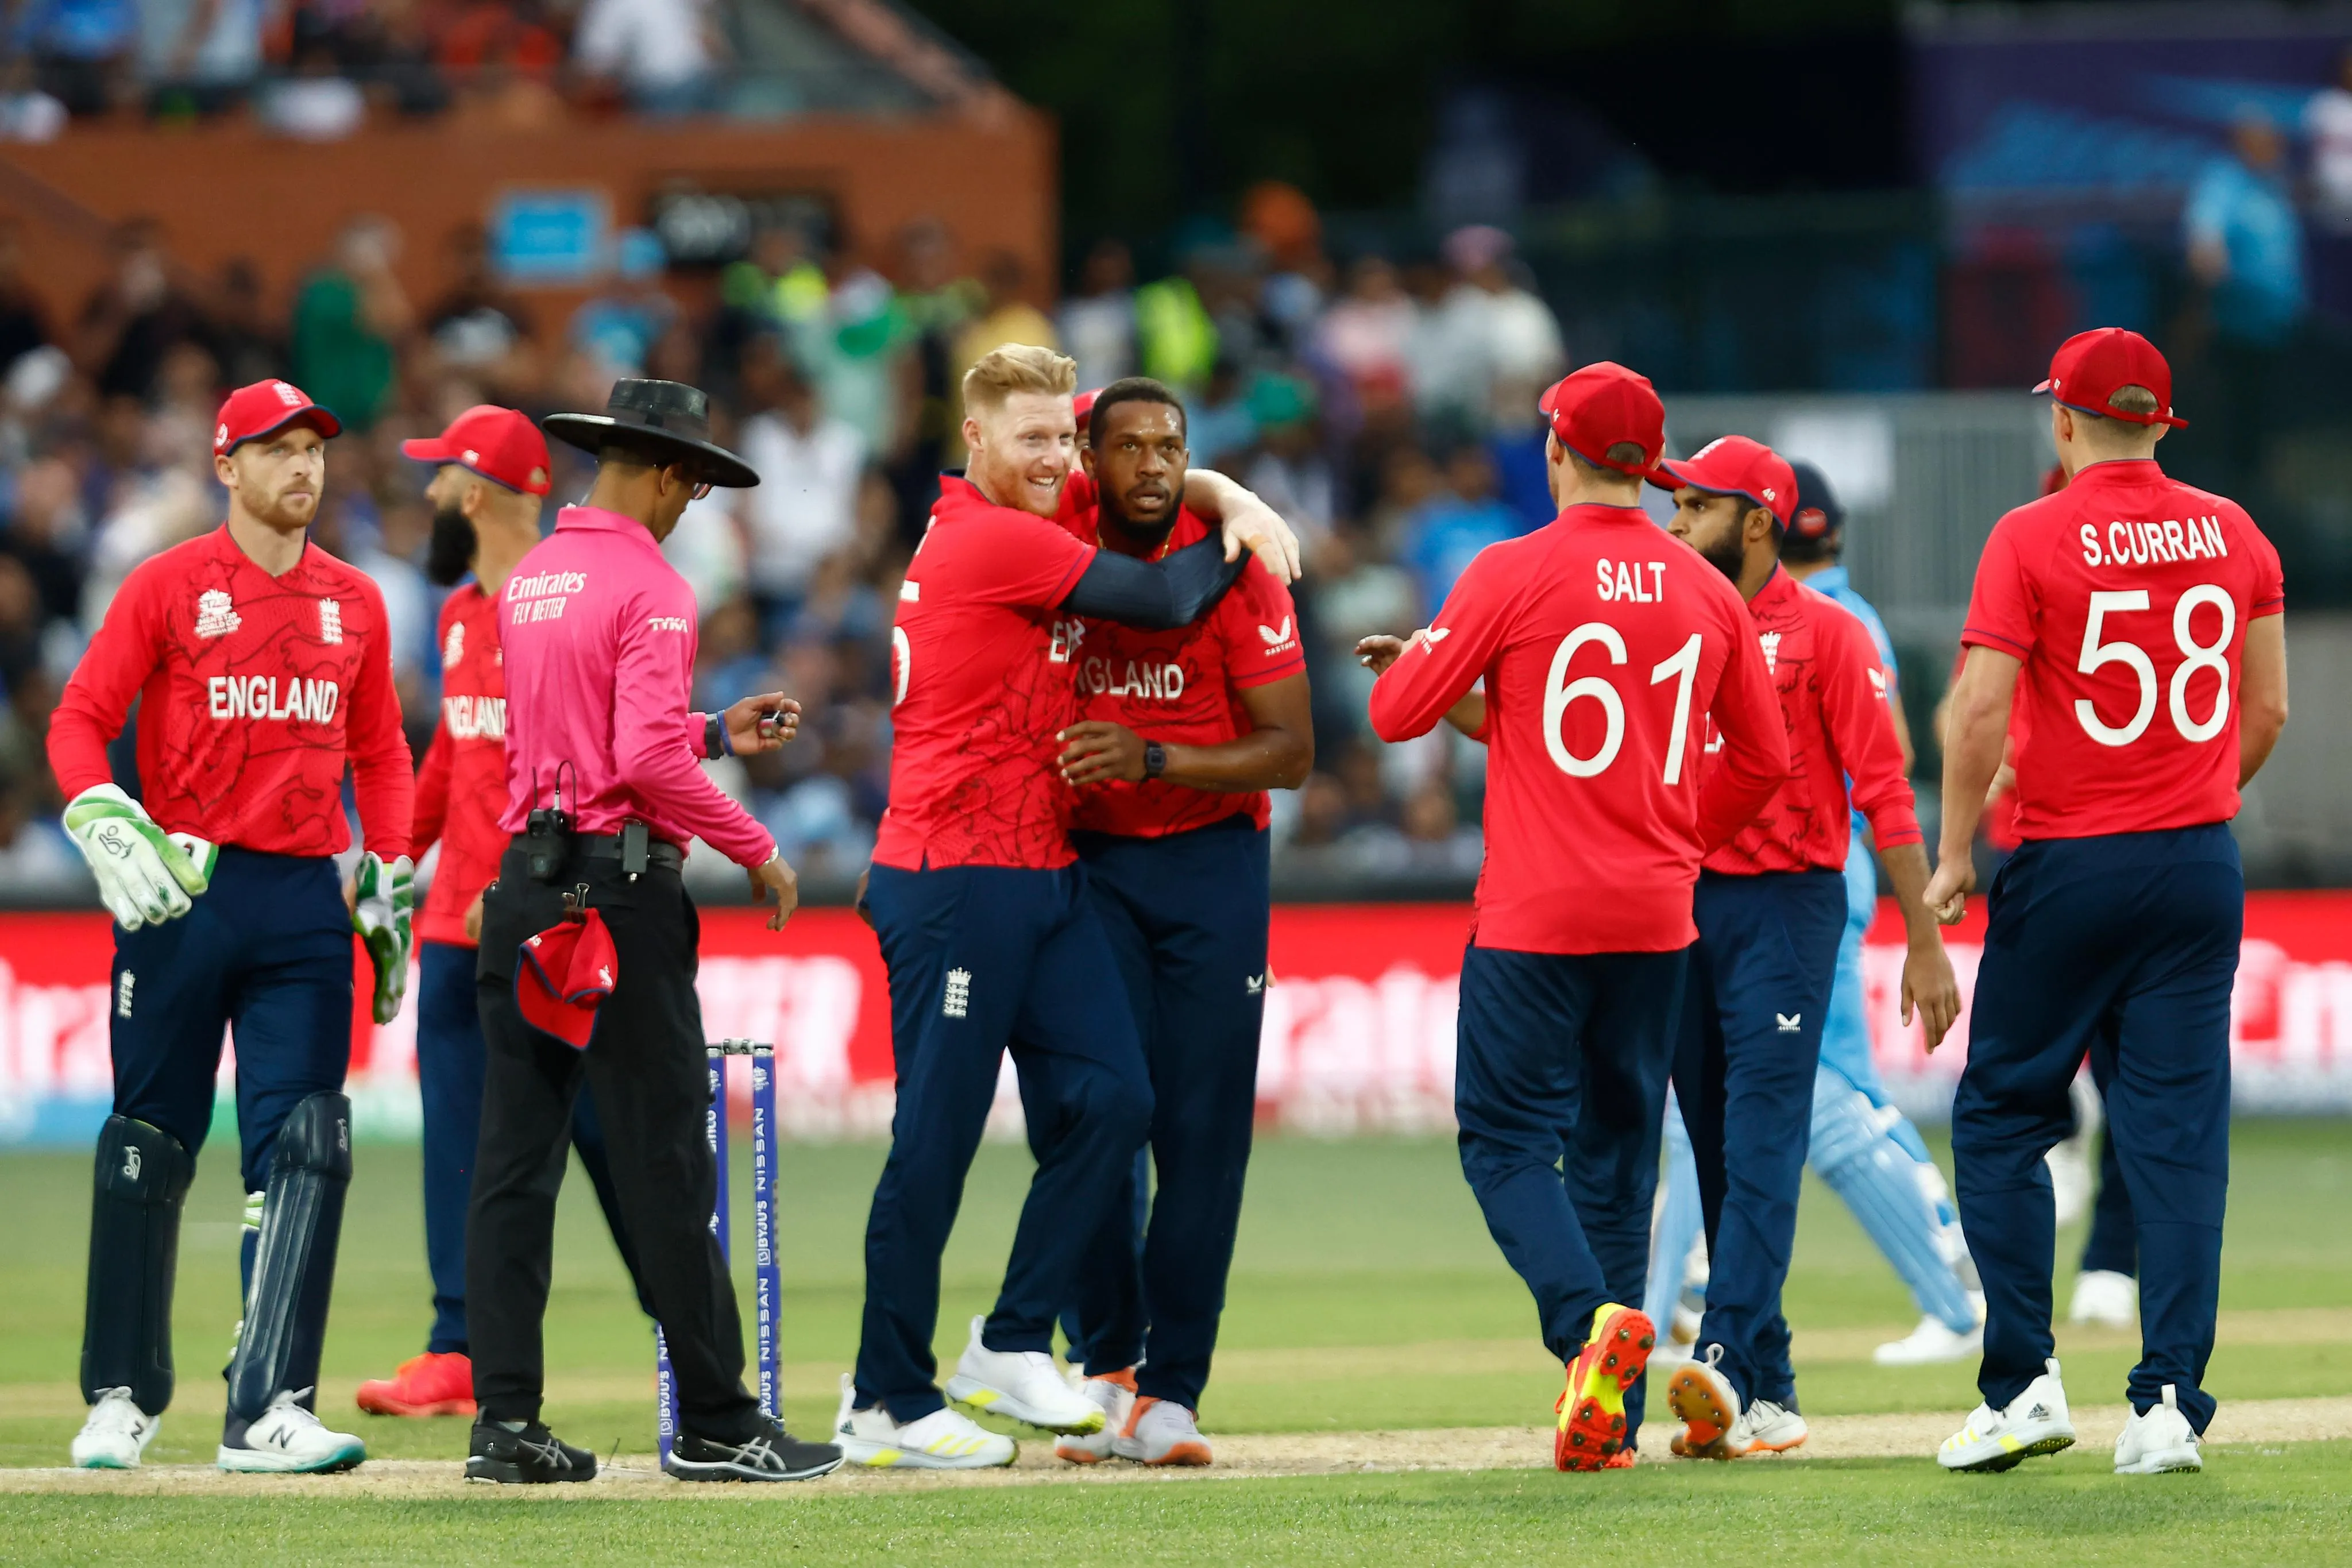 fusie terug Zonnebrand ICC World T20 | Twitter reacts as England turn into Pakistan with  combination of catch drop, missed run out and overthrow